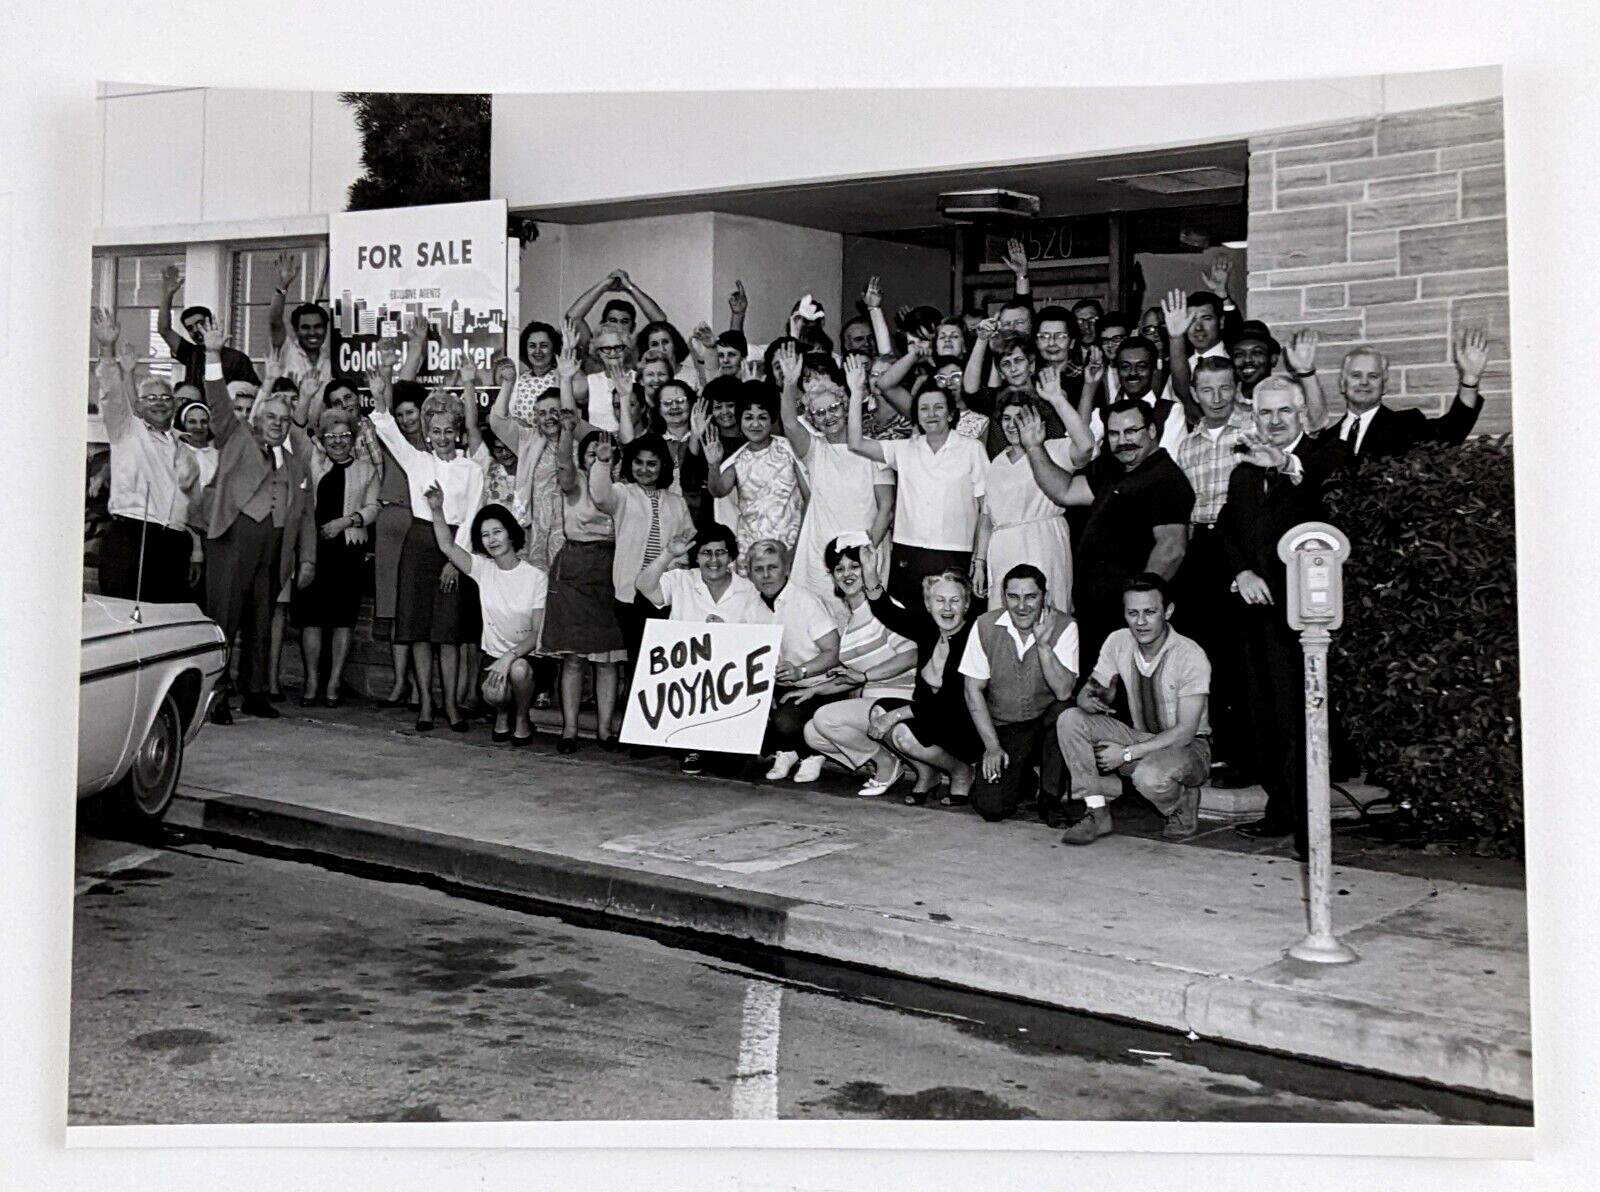 1960s Business Closing Employees Coldwell Banker Men Women Waving Vintage Photo